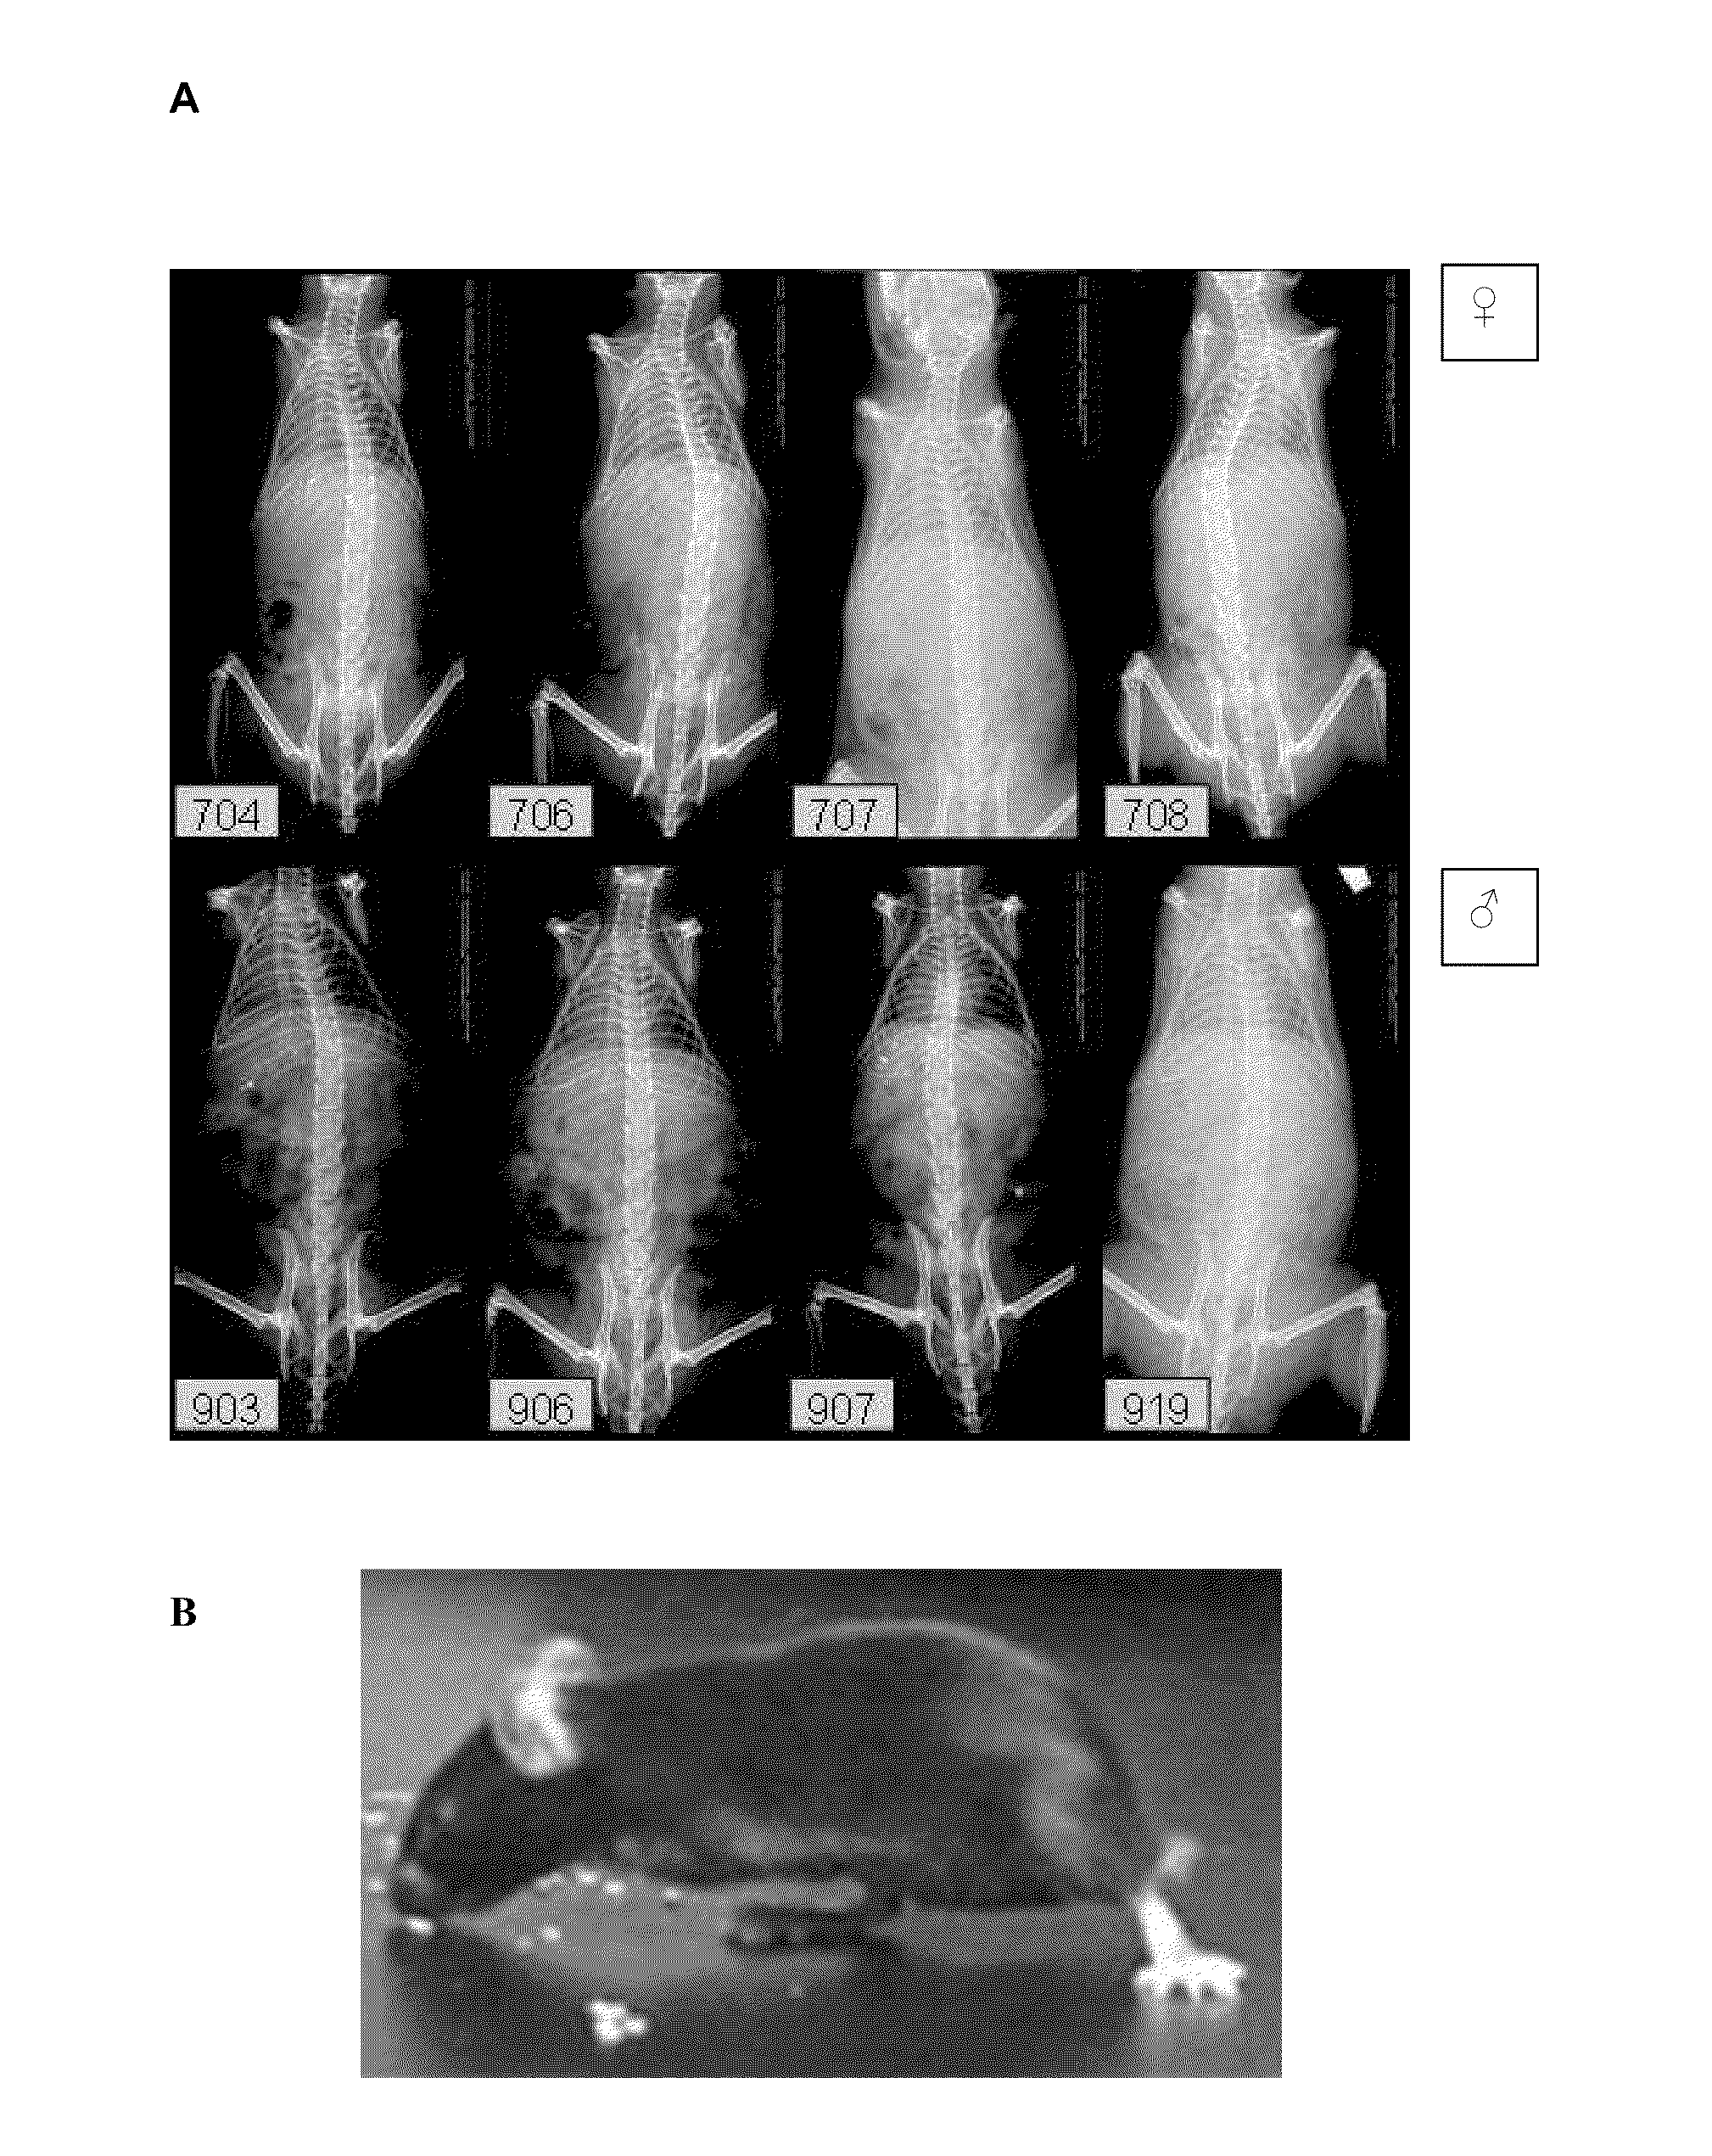 Methods of screening for compounds for use as modulators of left-right asymmetry in scoliotic subjects and for monitoring efficacy of an orthopaedic device